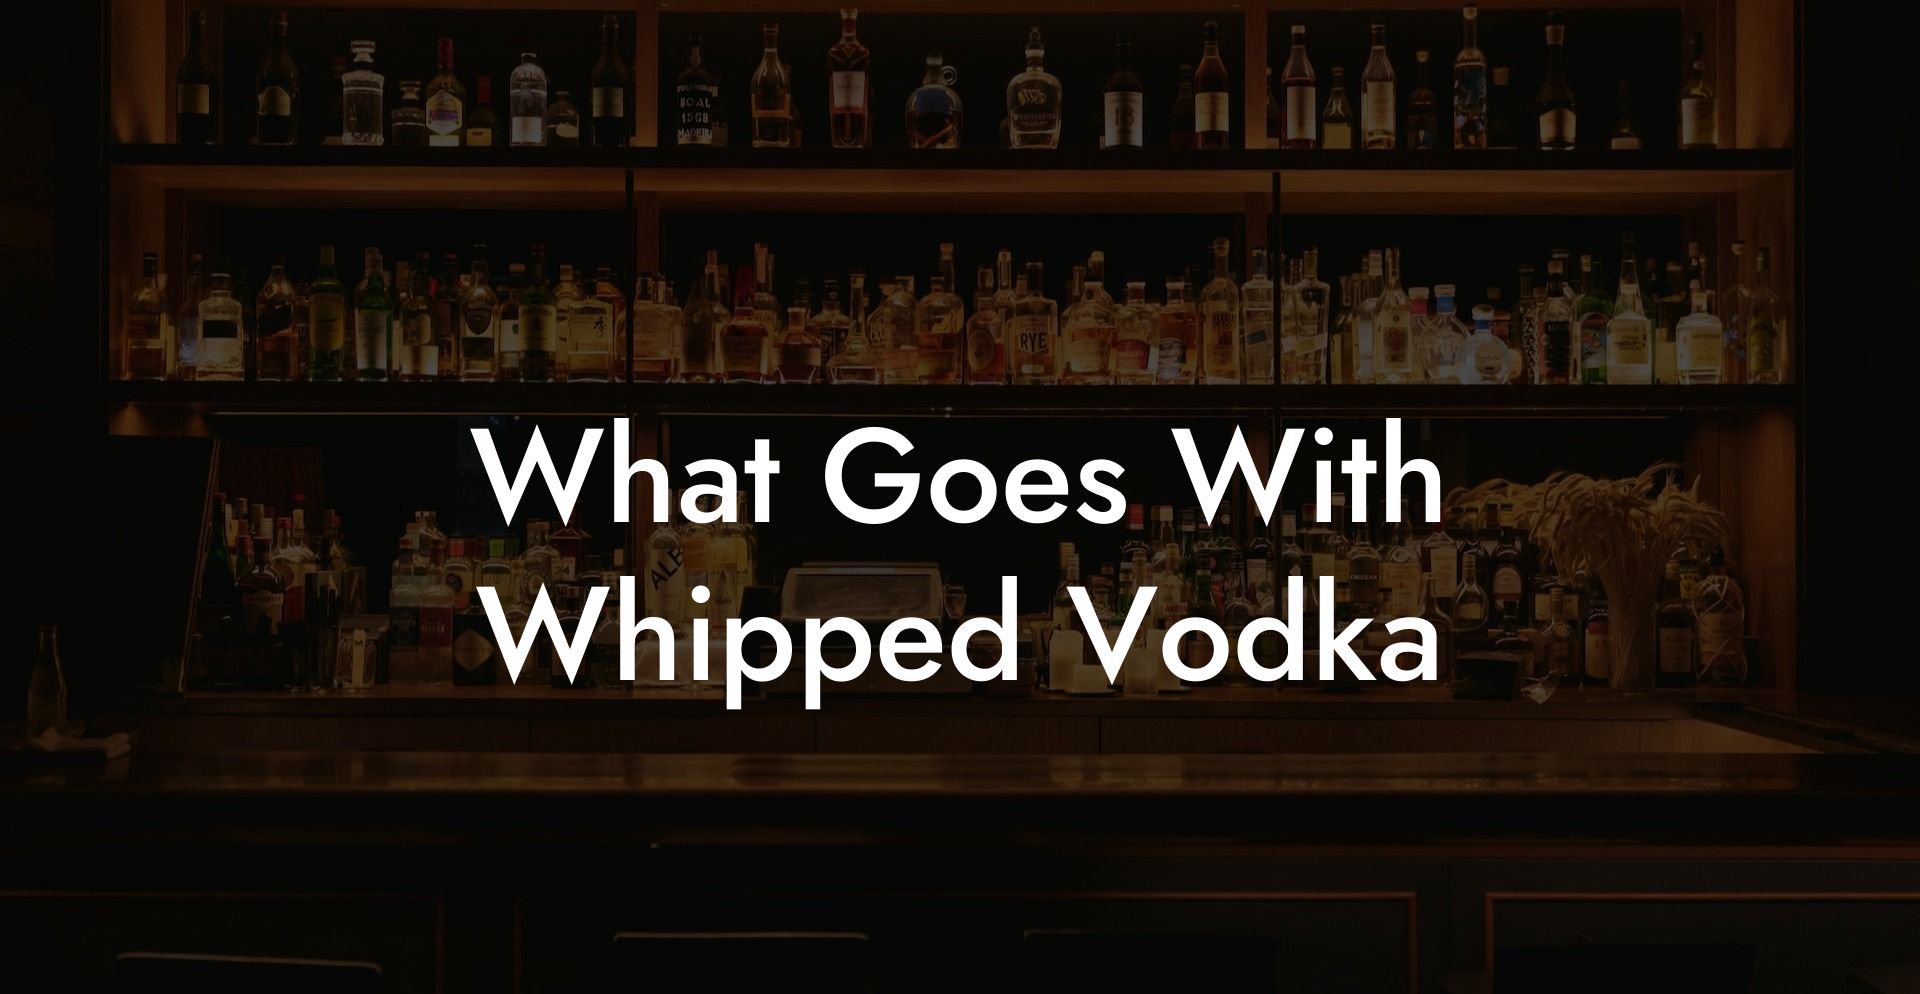 What Goes With Whipped Vodka